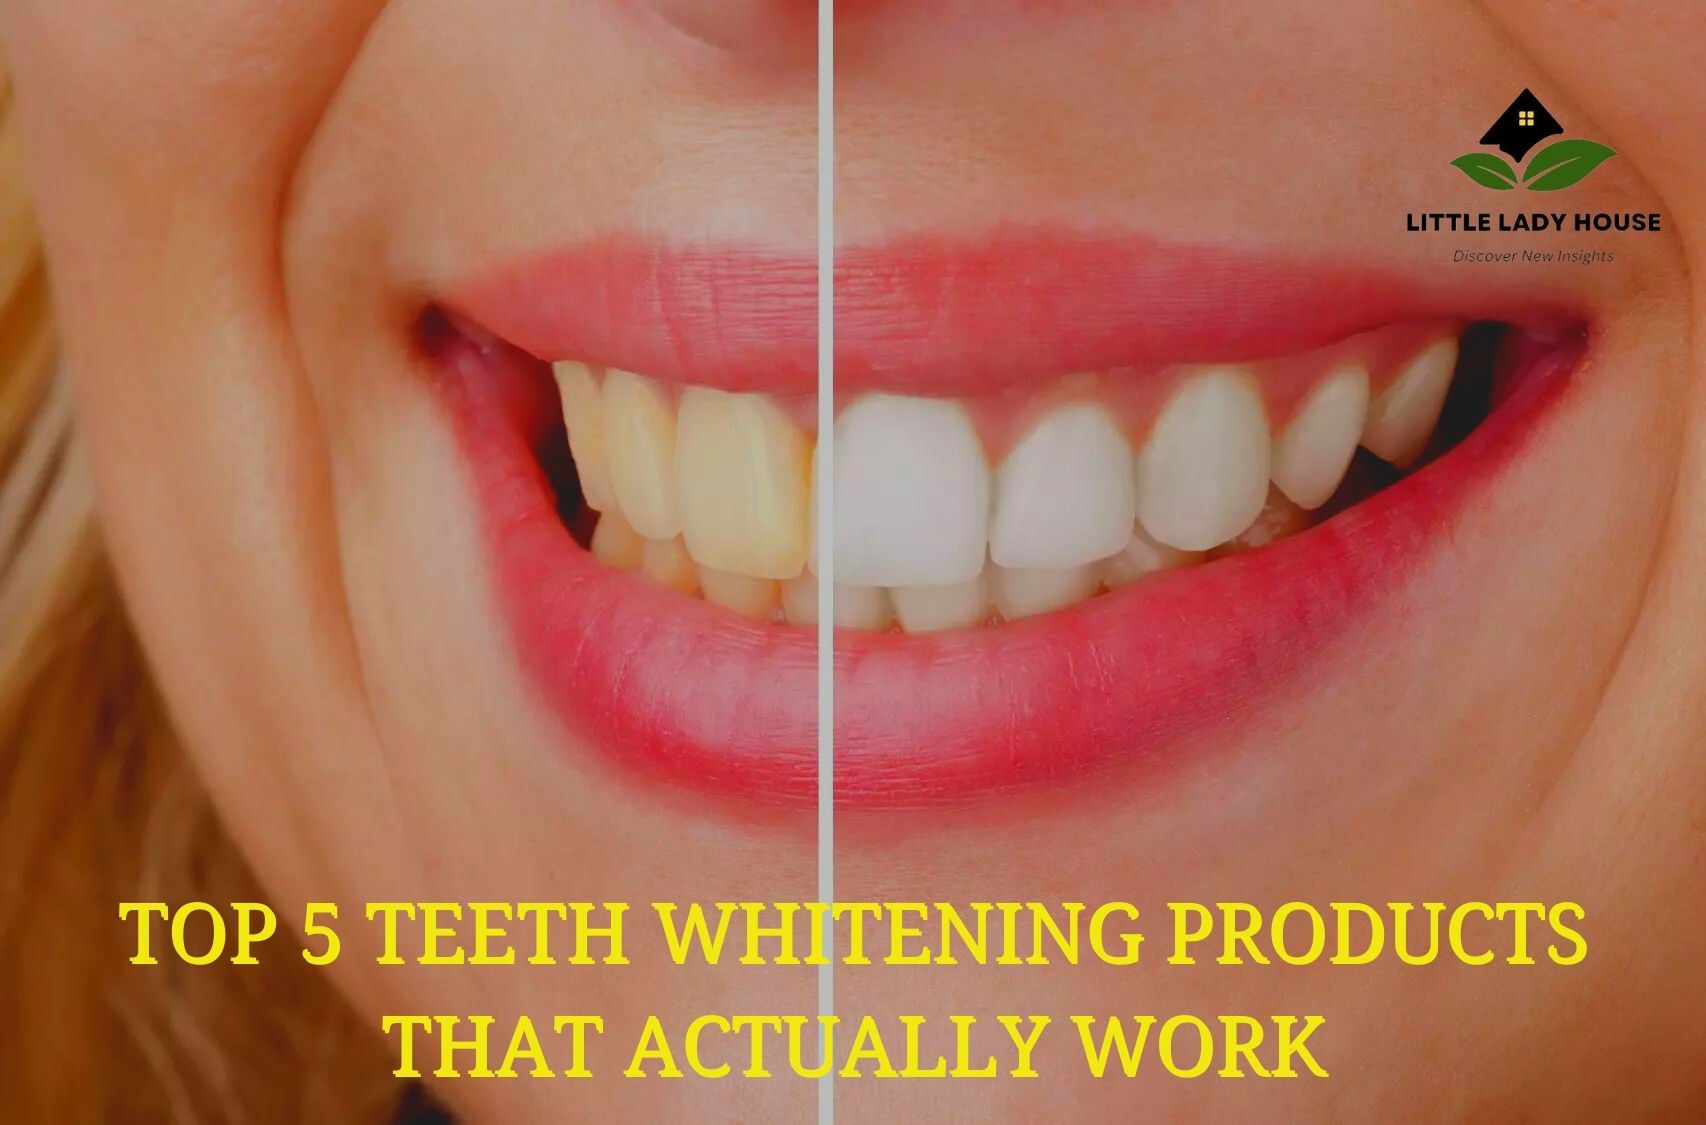 TOP 5 TEETH WHITENING PRODUCTS THAT ACTUALLY WORK